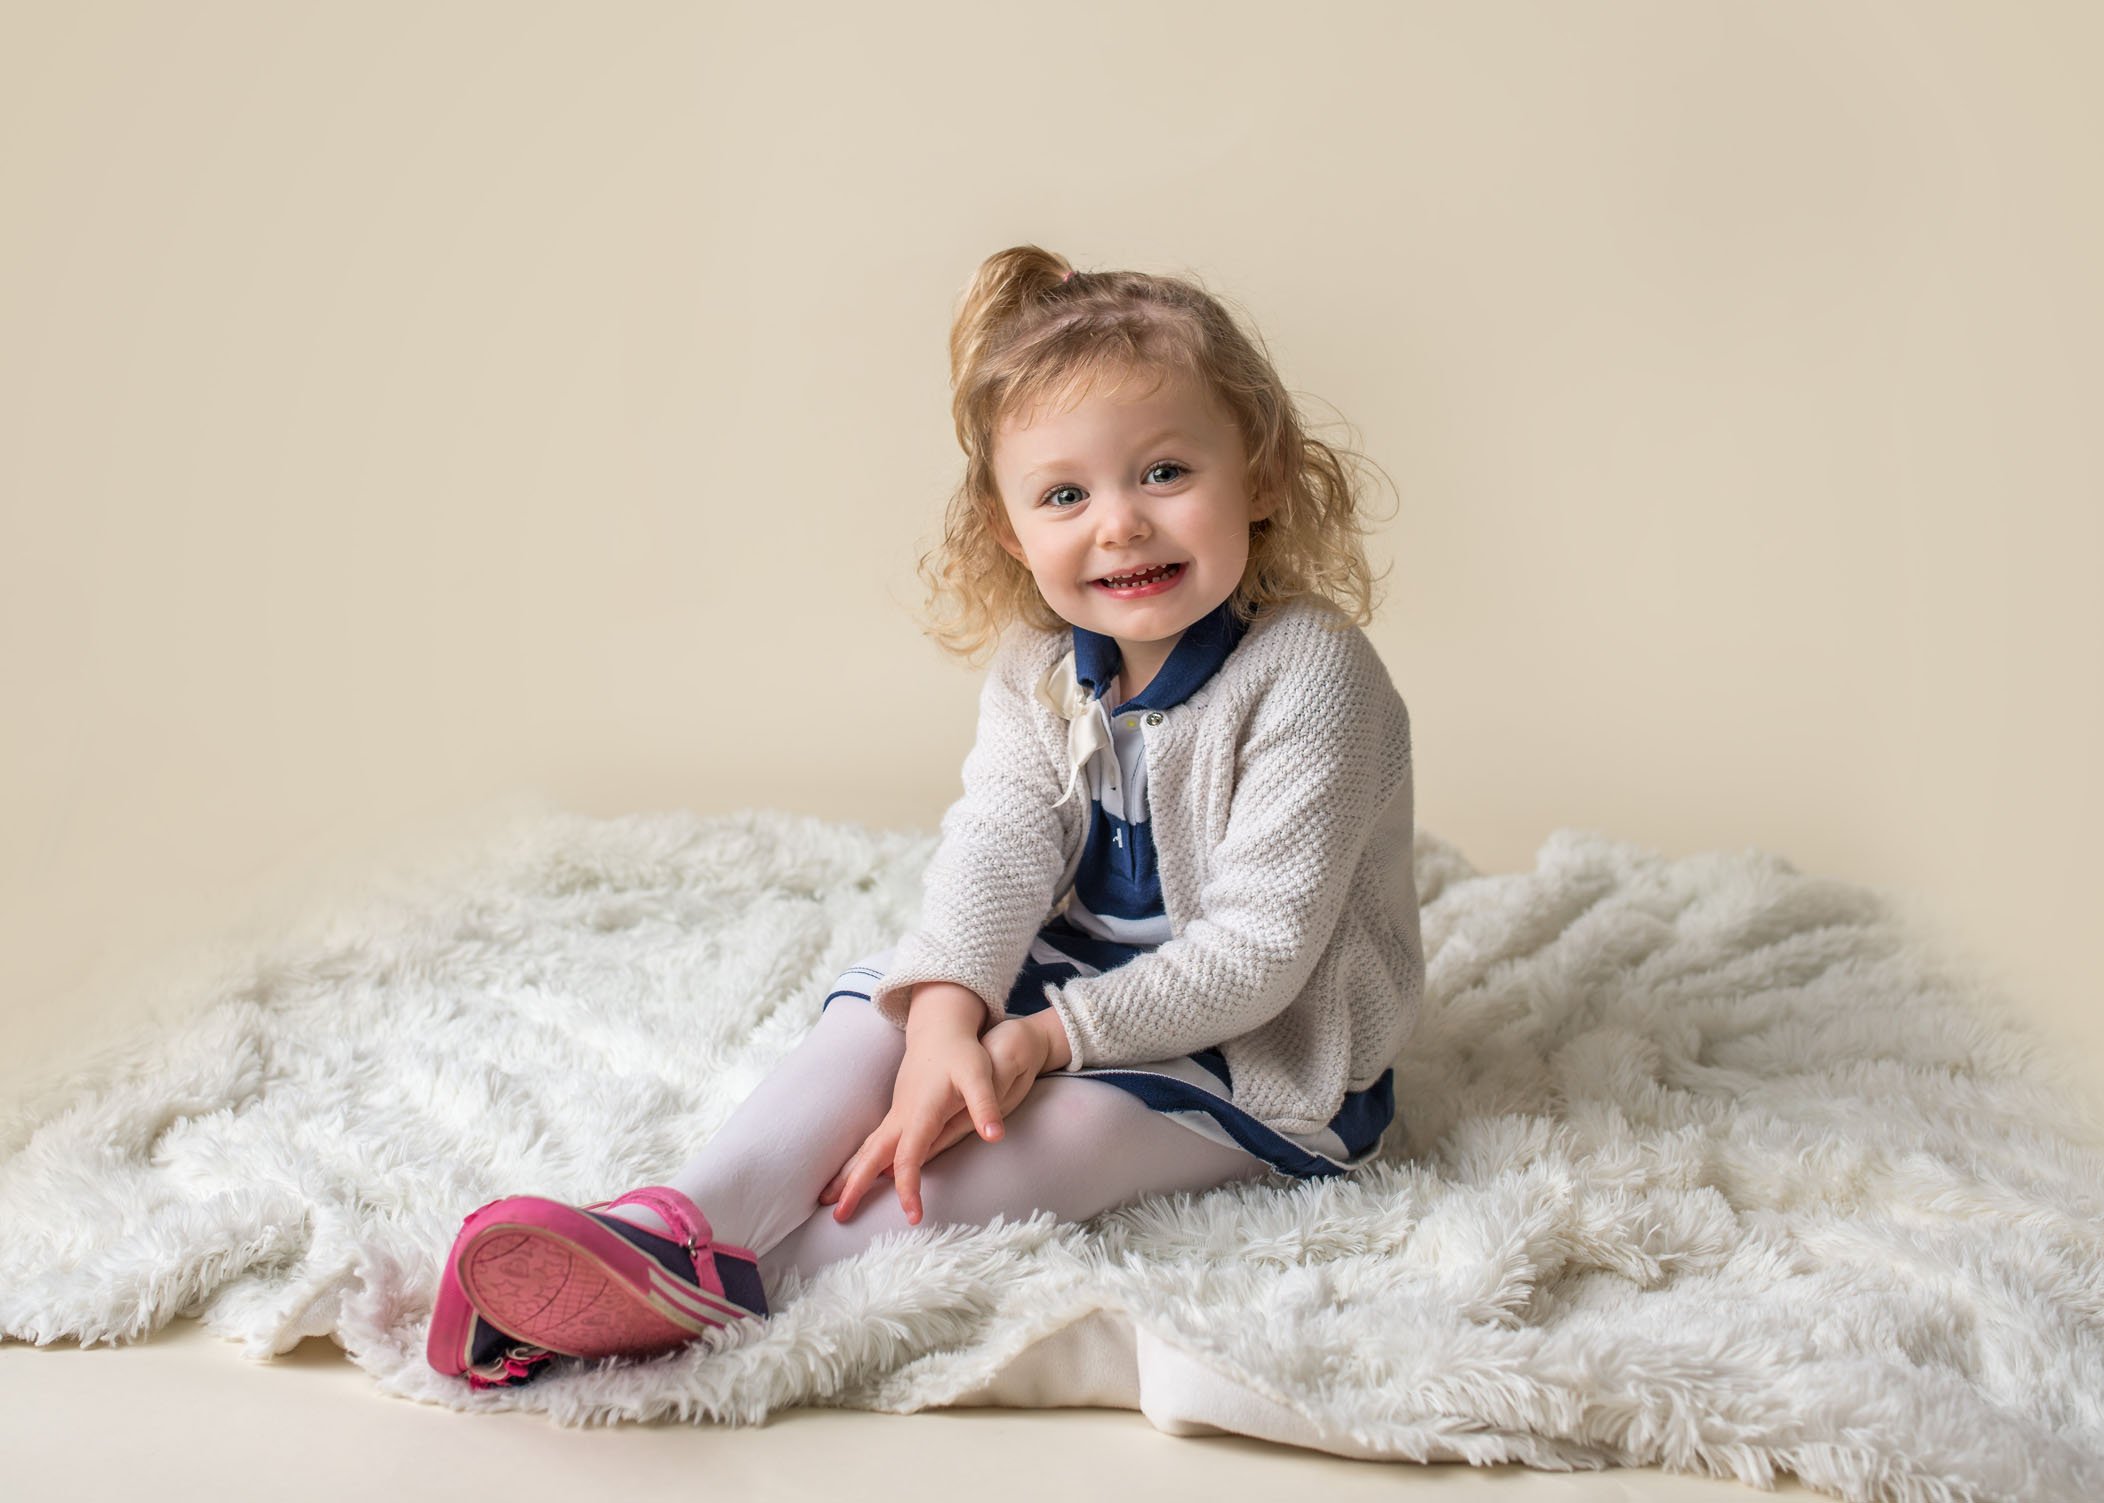 2 year old little girl sitting on white rug smiling One Big Happy Photo